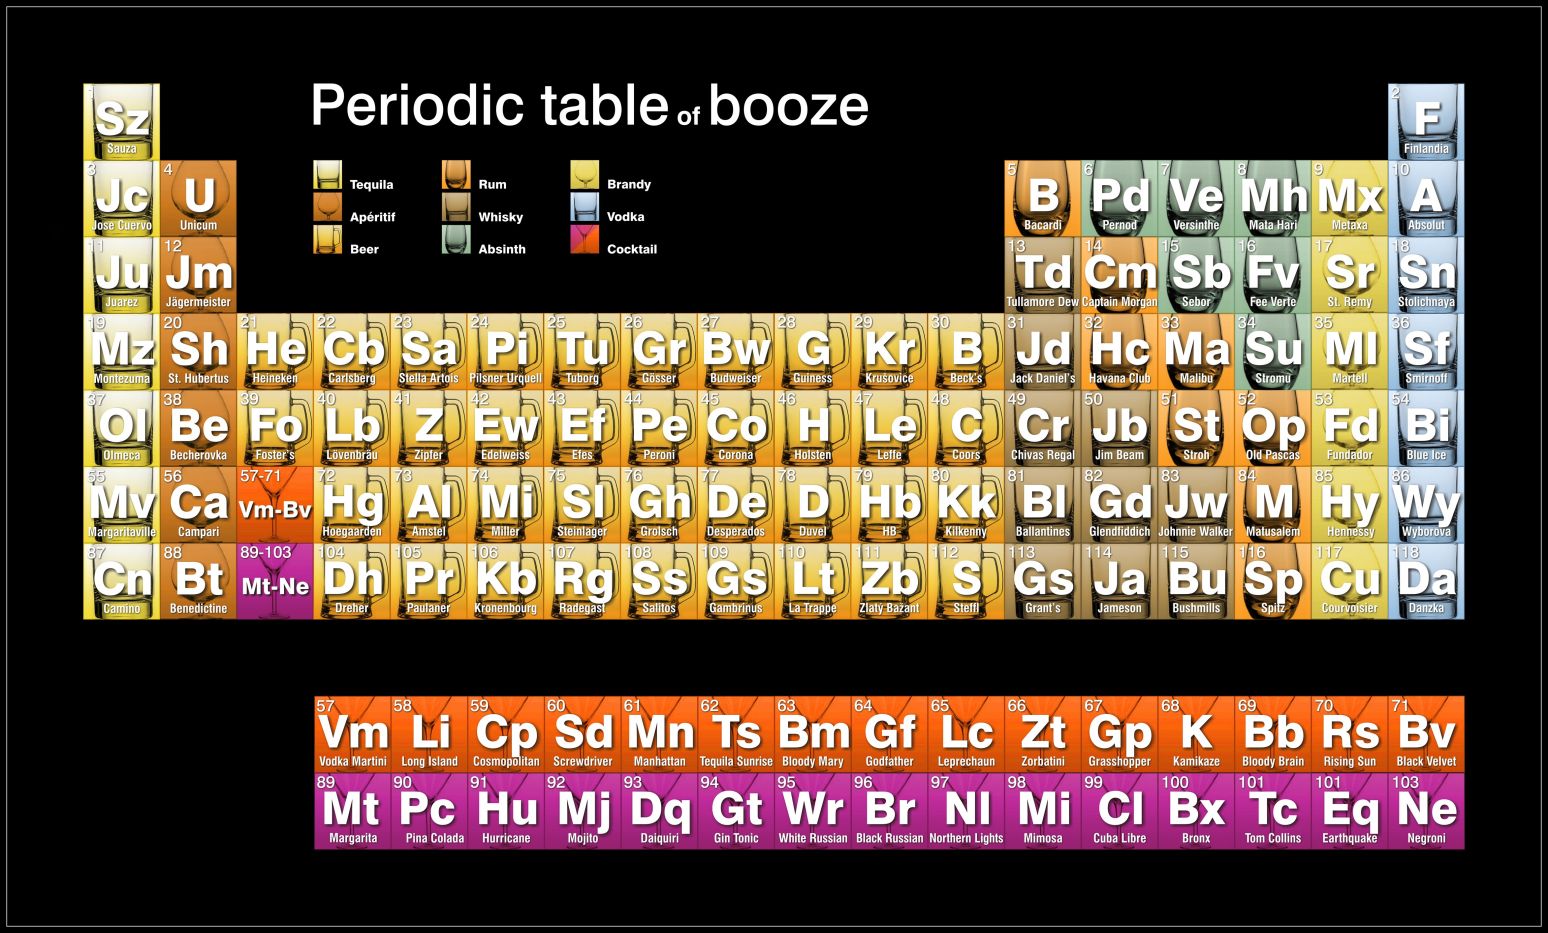 Periodic_table_of_booze_by_tsong2002.jpg